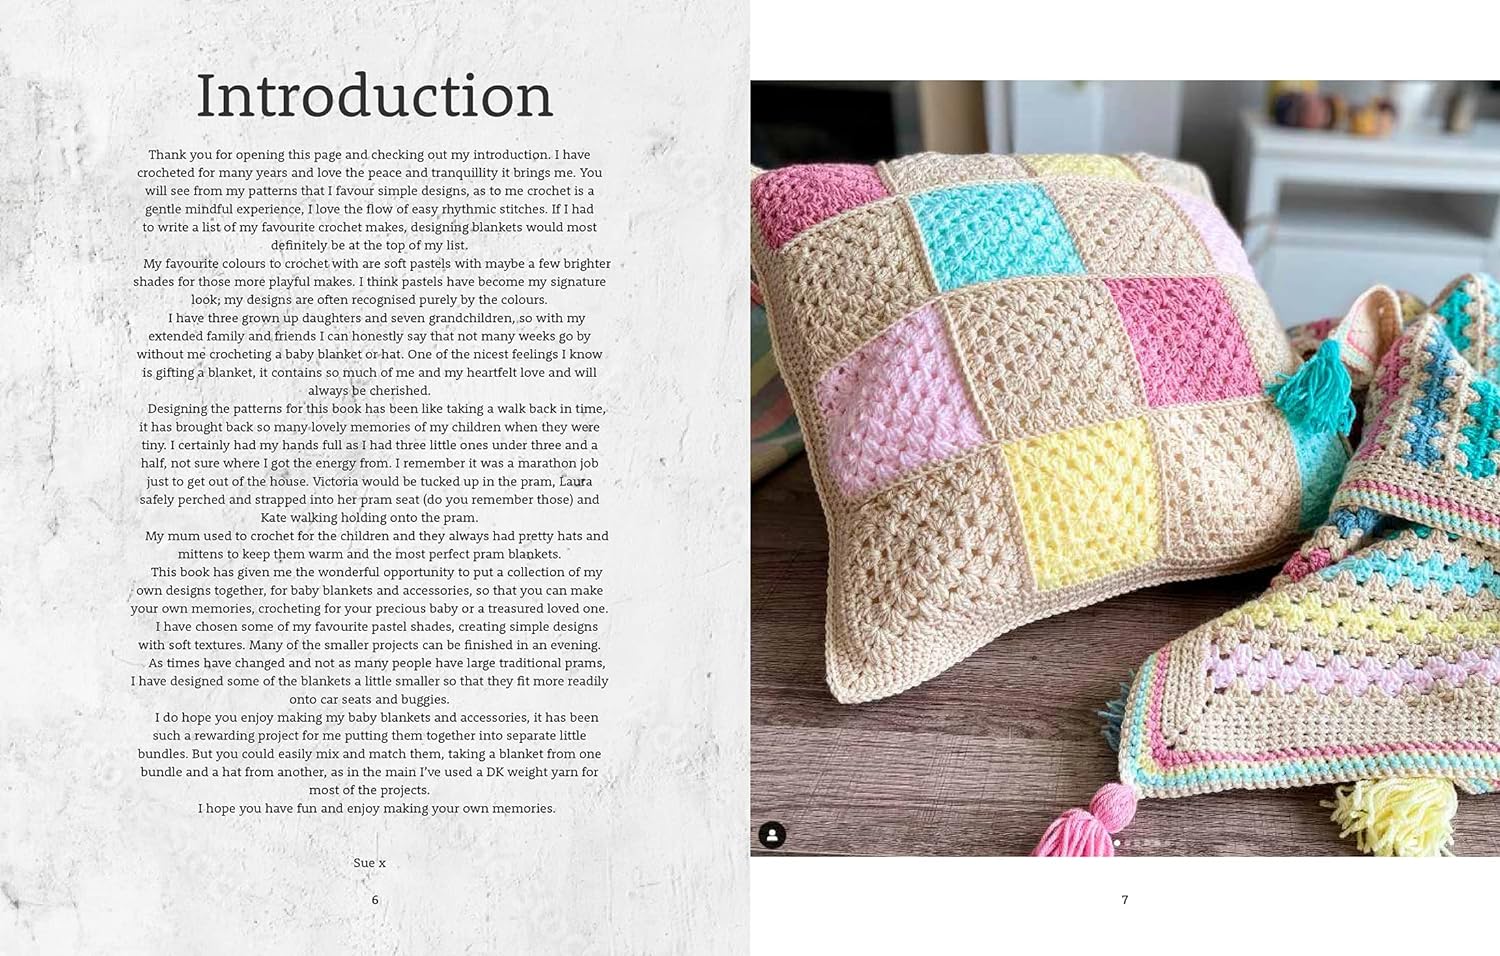 Sweet Pea Crochet: 20 beautiful baby blankets & matching gifts Paperback – 28 March 2023